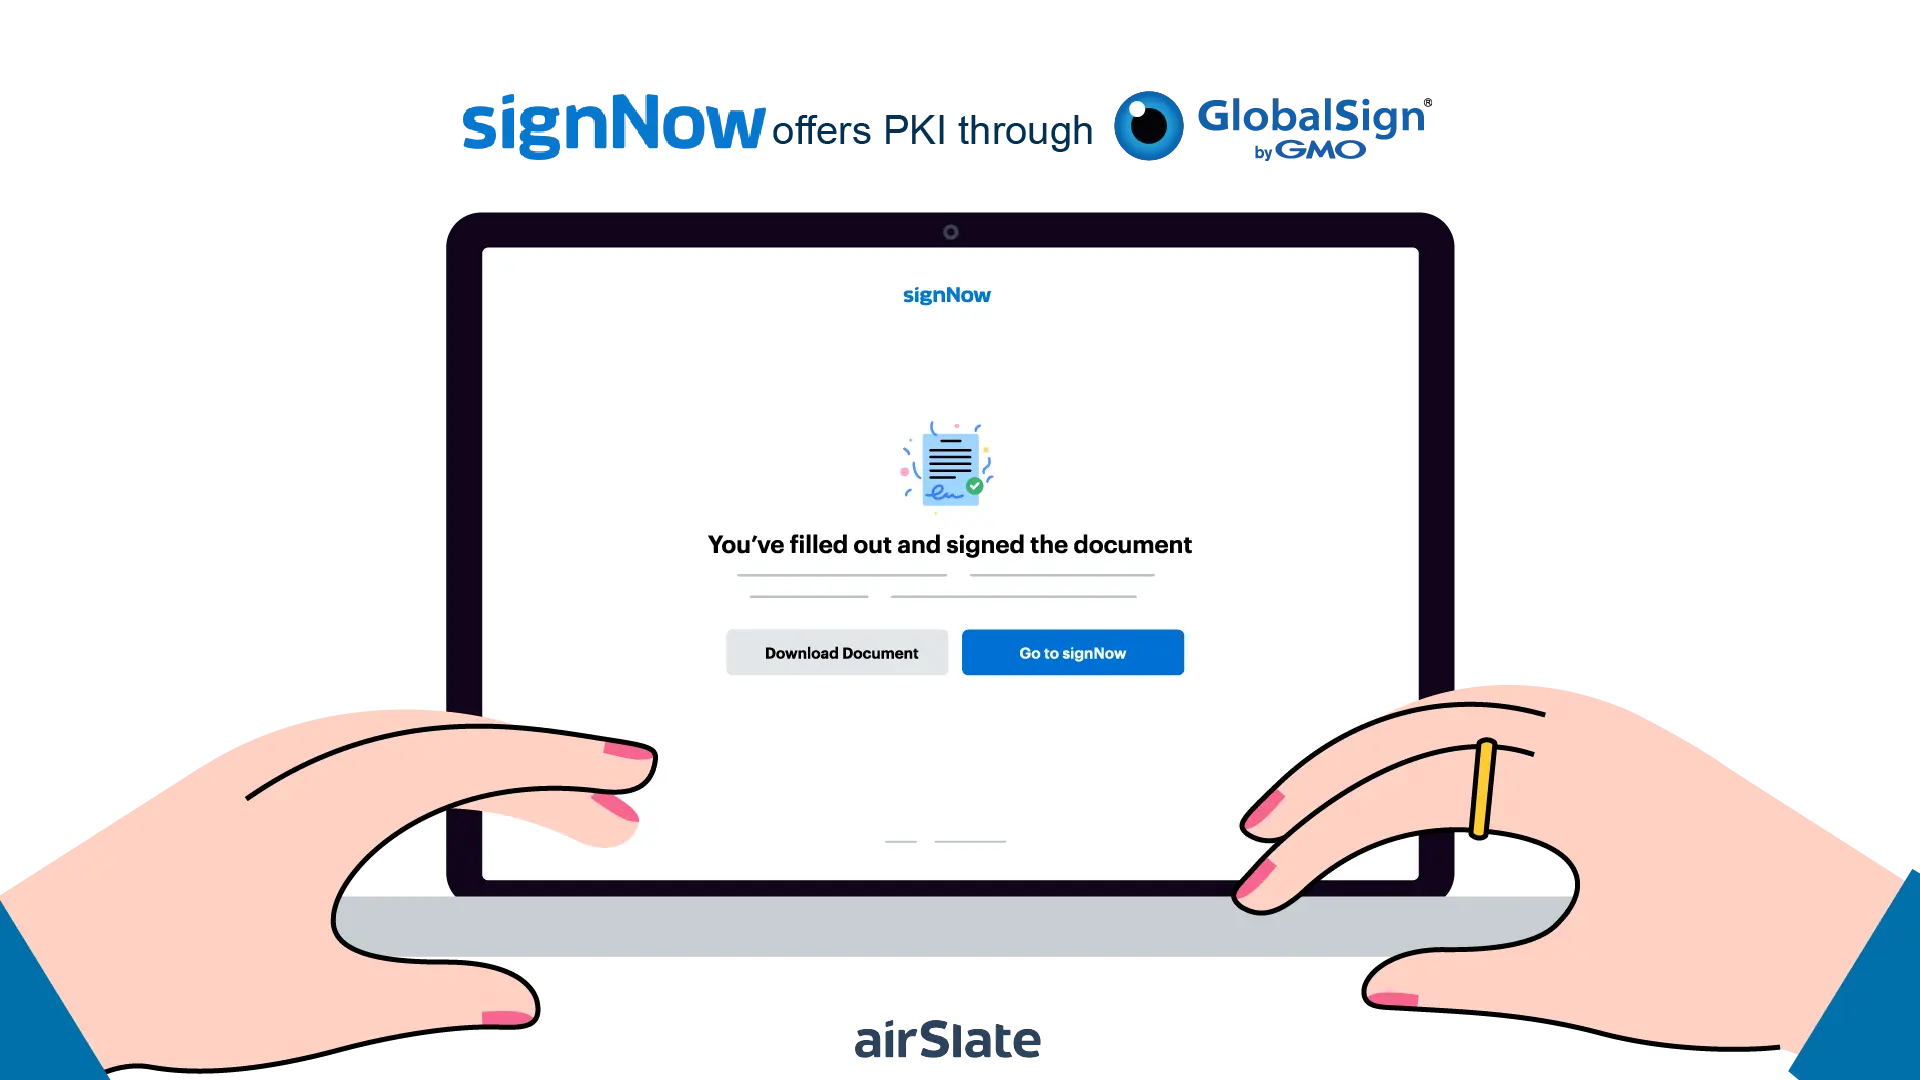 desktop 2 - GS and SignNow image for landing page.png